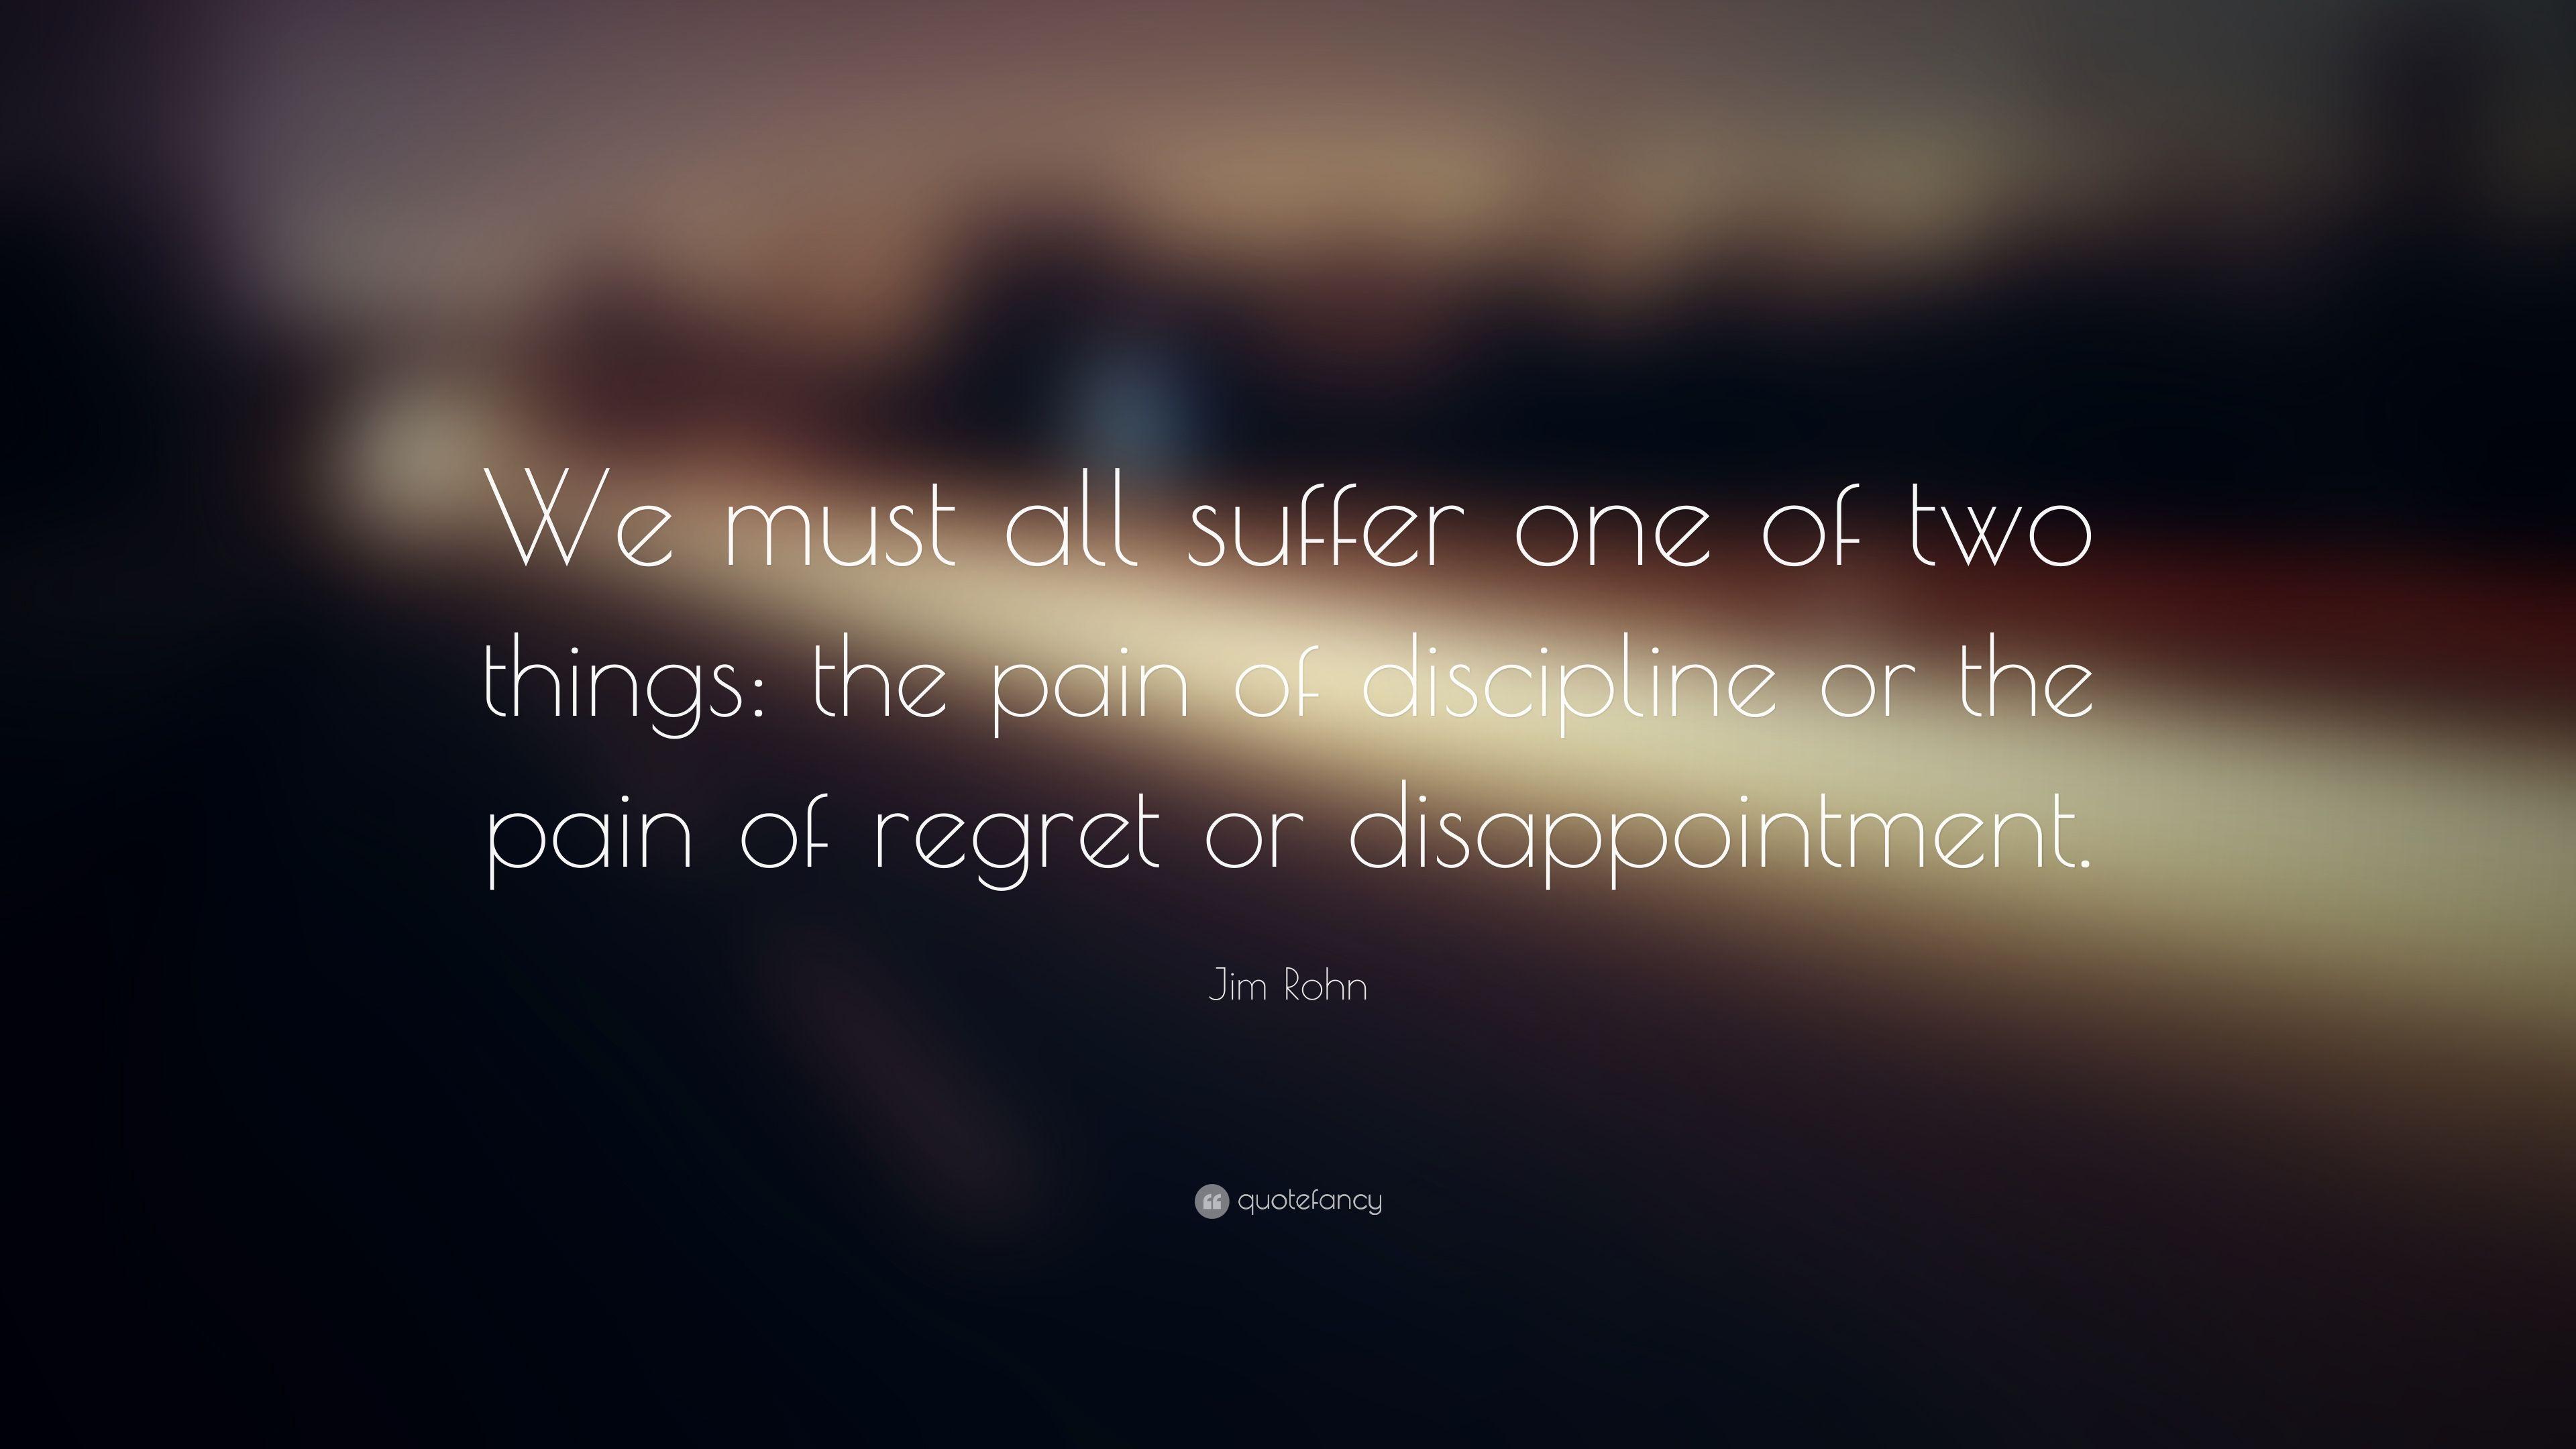 Jim Rohn Quote: “We must all suffer one of two things: the pain